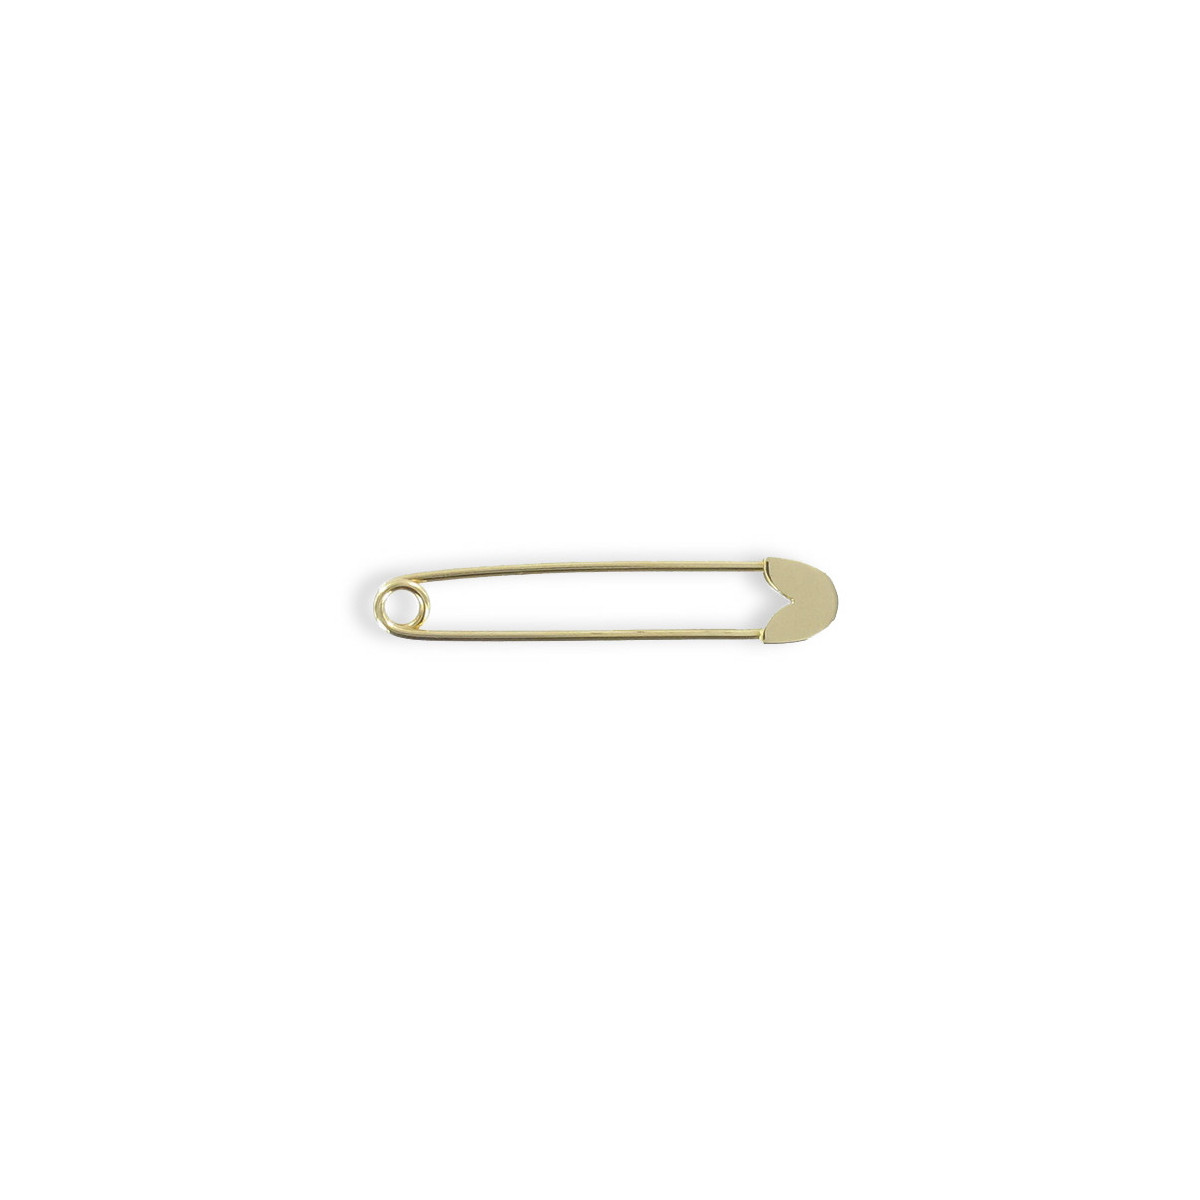 Gold Safety Pins Size 2 - 1.5 Inch 144 Pieces 